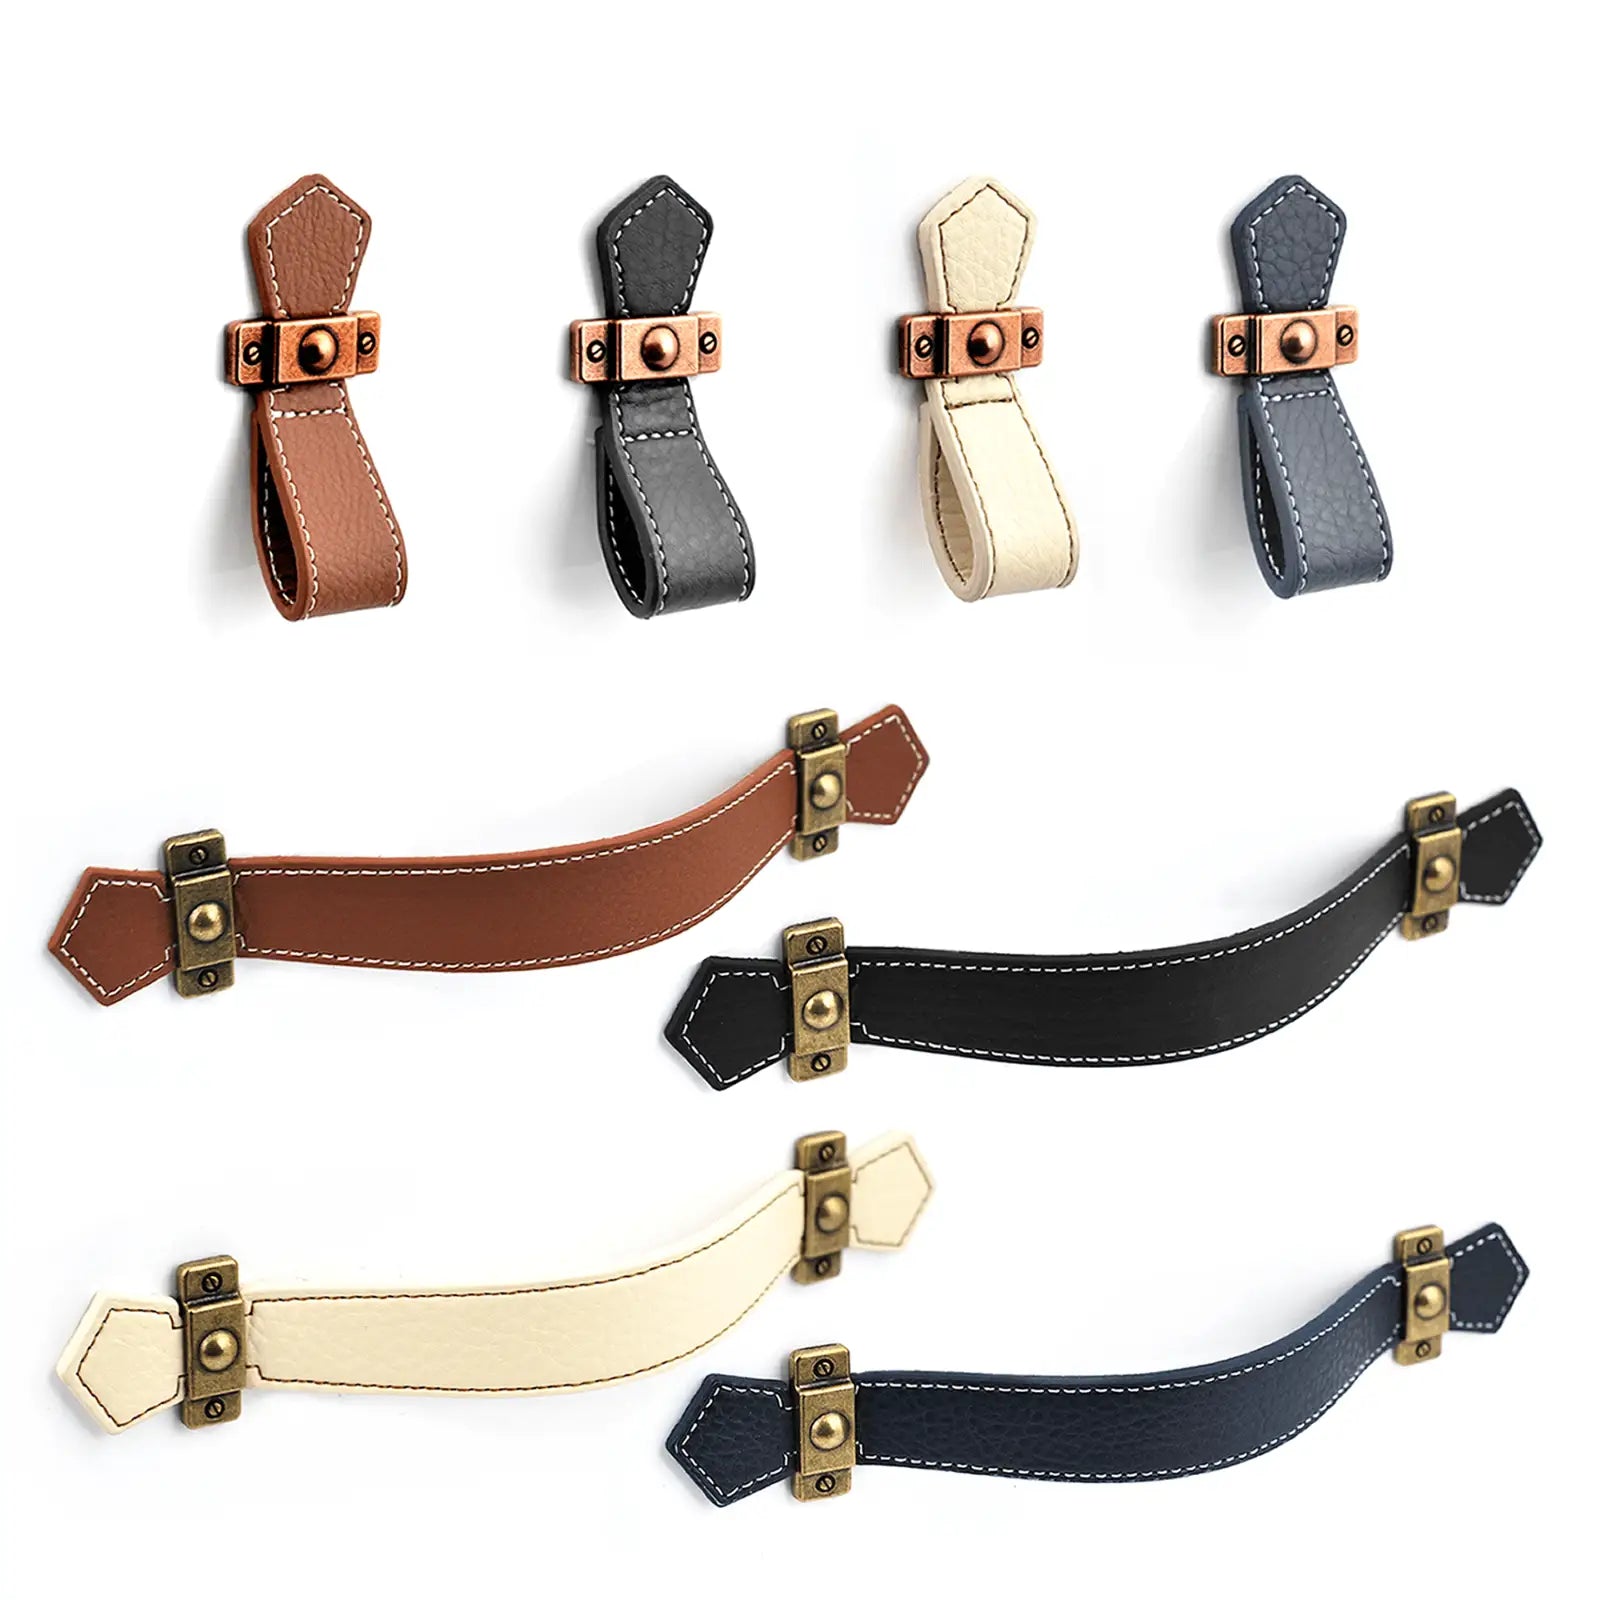 Leather Cabinet Pulls and Strap Handles To Match - Decor And Decor